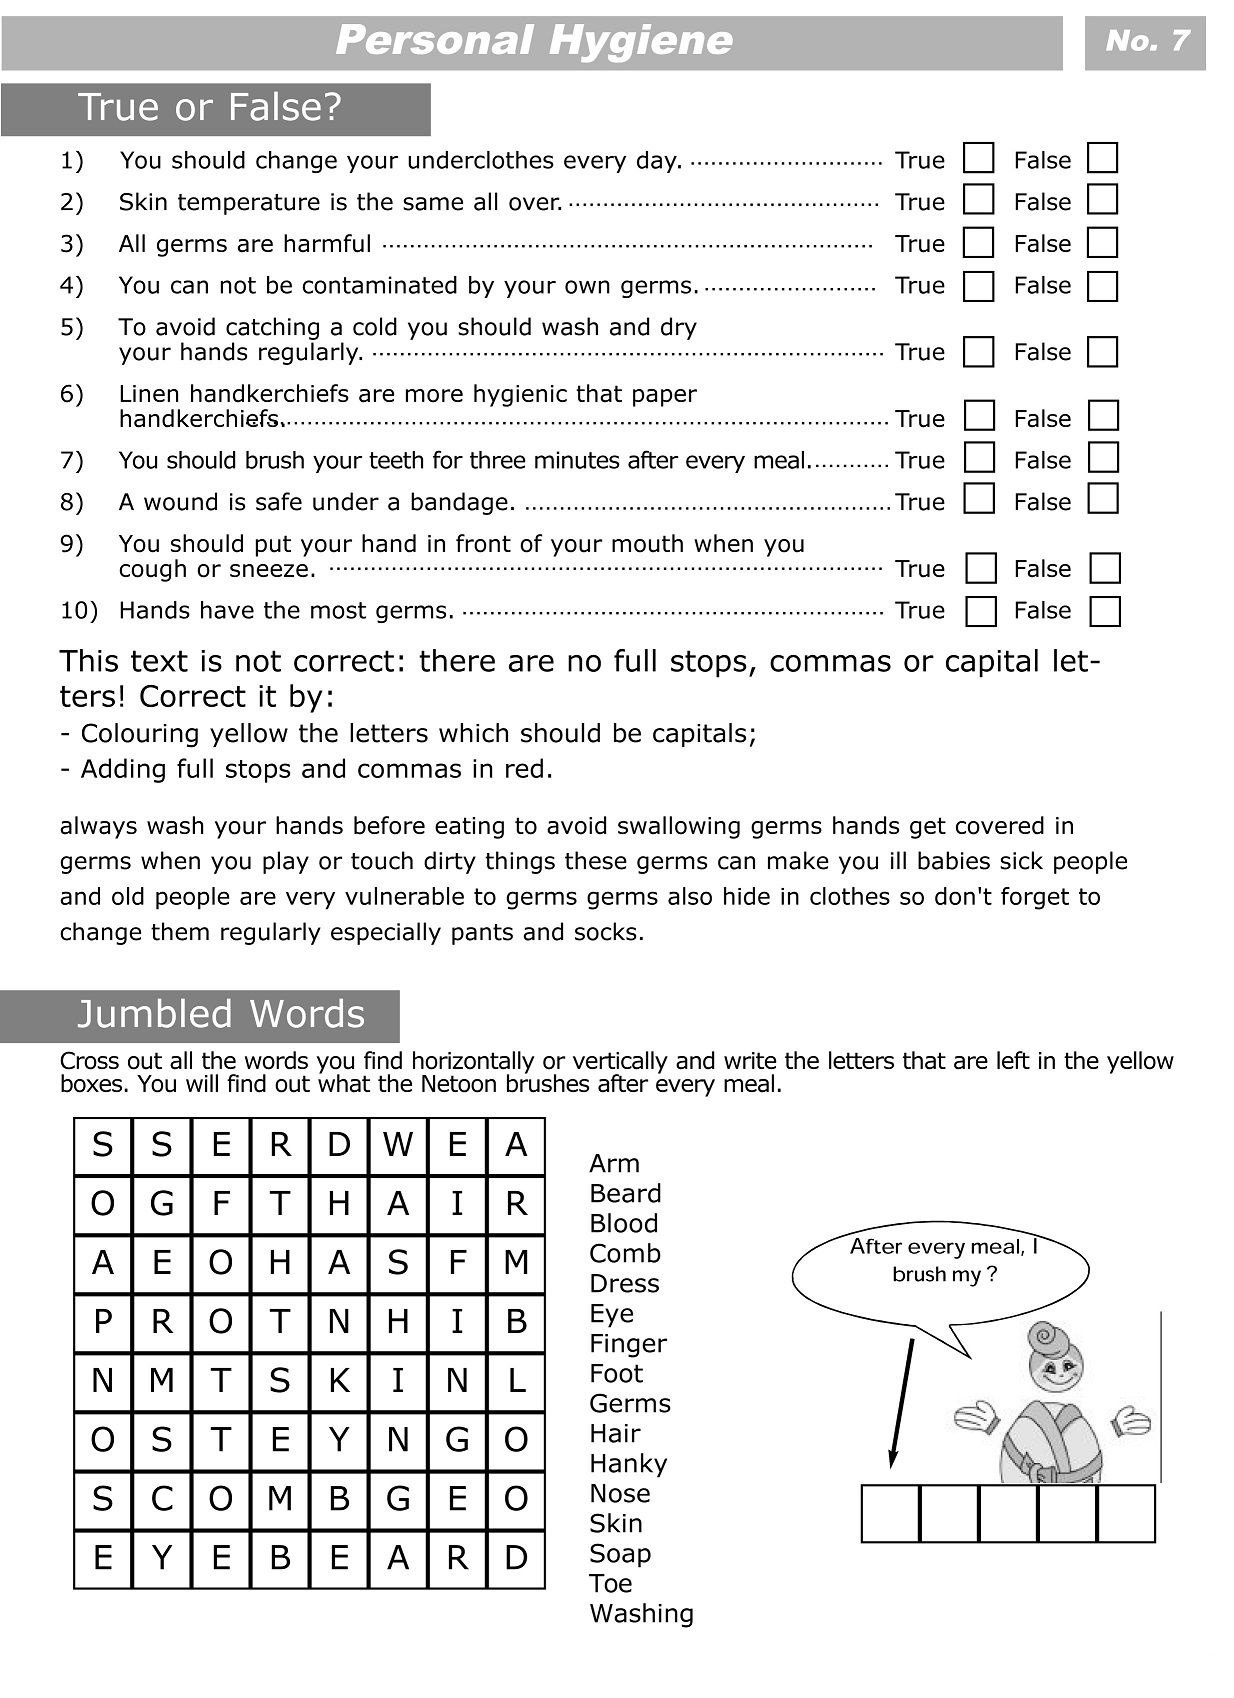 Printable Worksheets For Personal Hygiene | Personal Hygiene - Free Printable Life Skills Worksheets